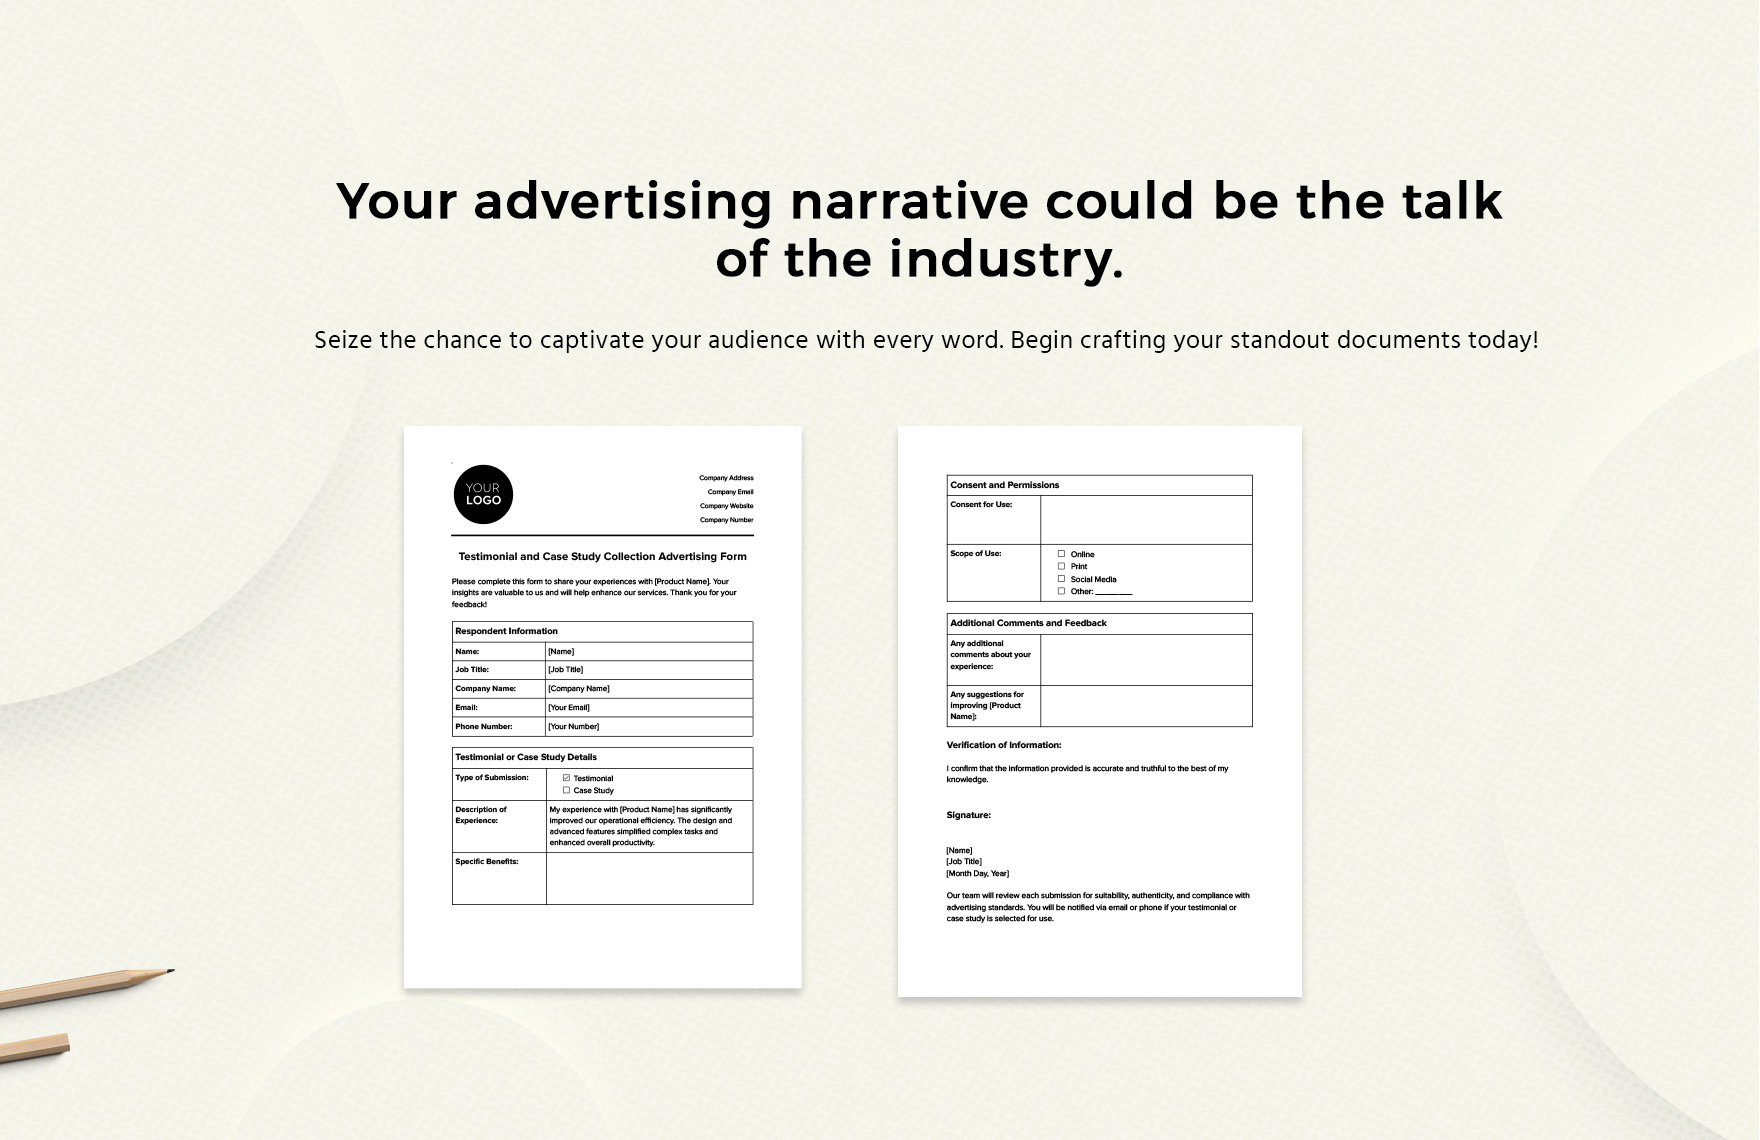 Testimonial and Case Study Collection Advertising Form Template